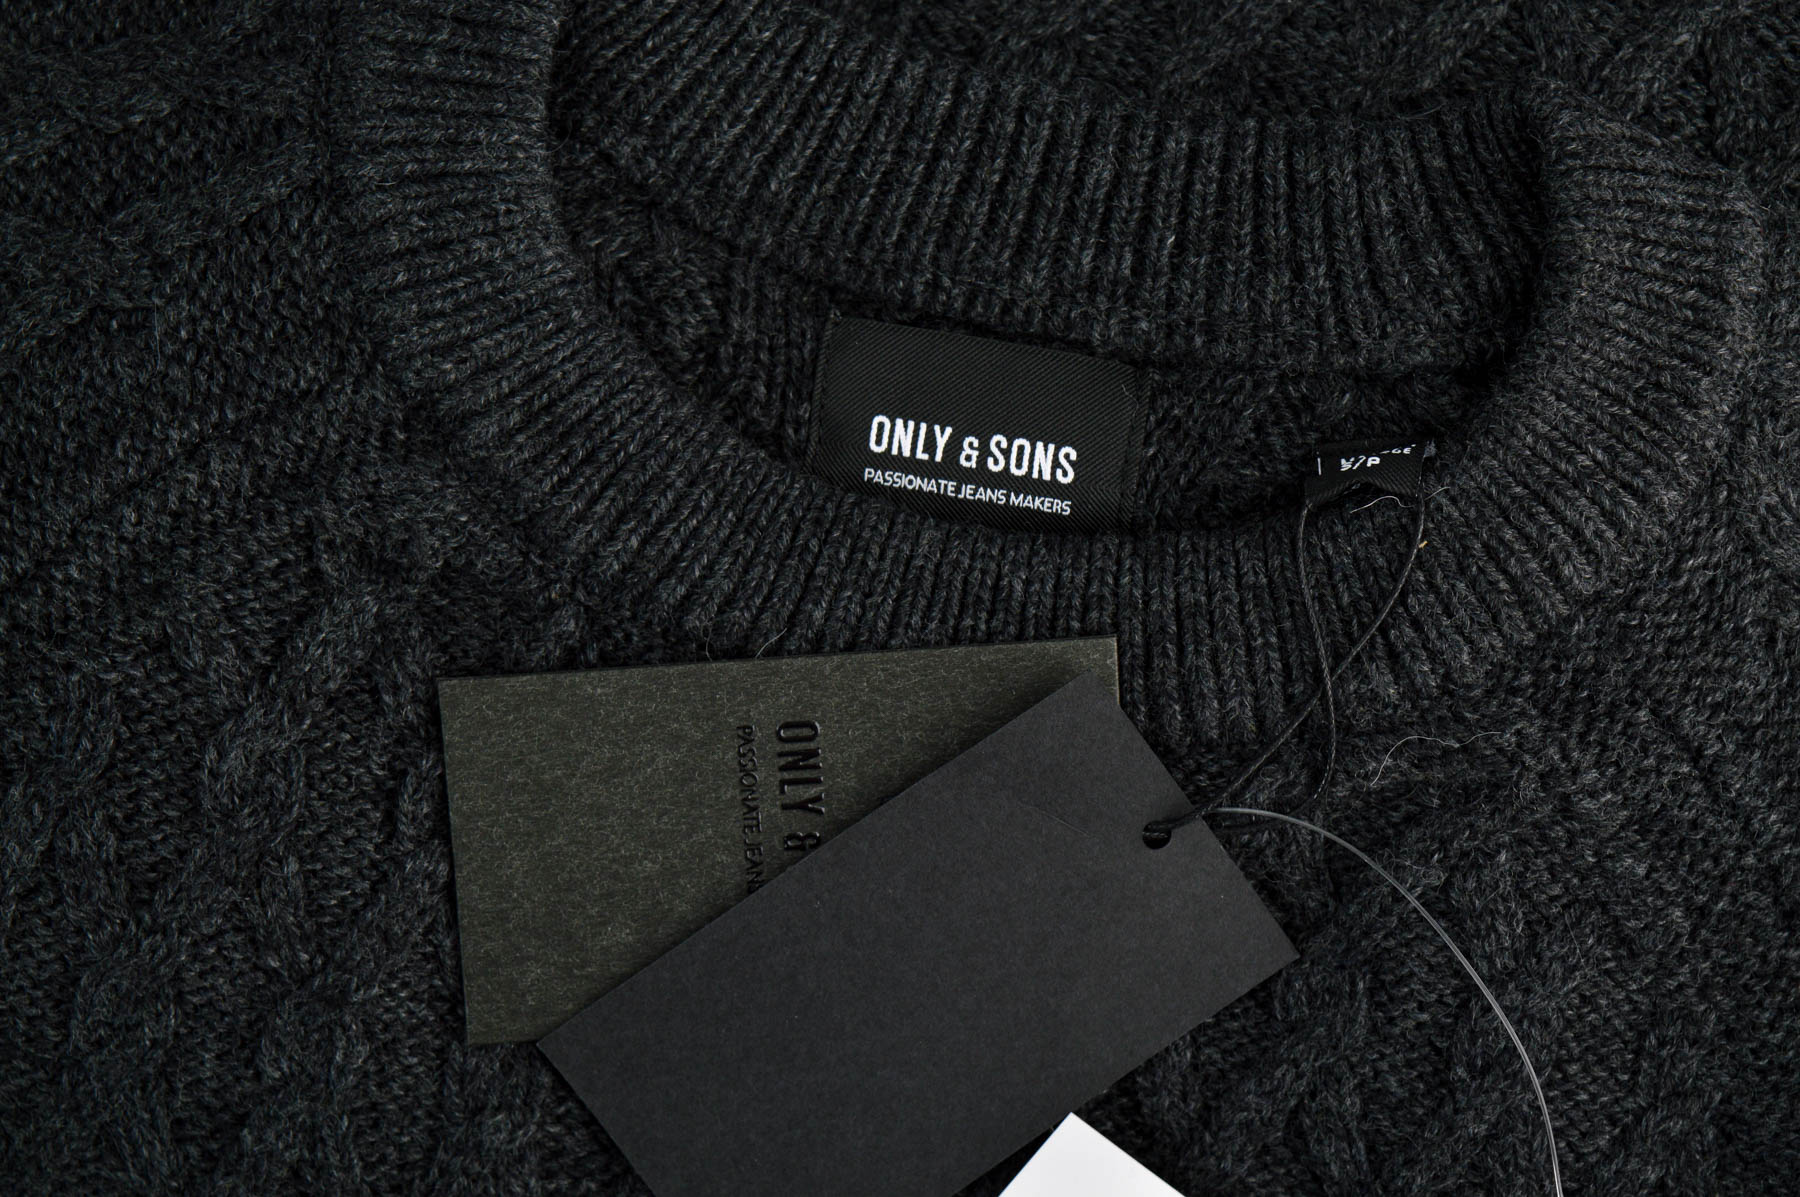 Men's sweater - ONLY & SONS - 2